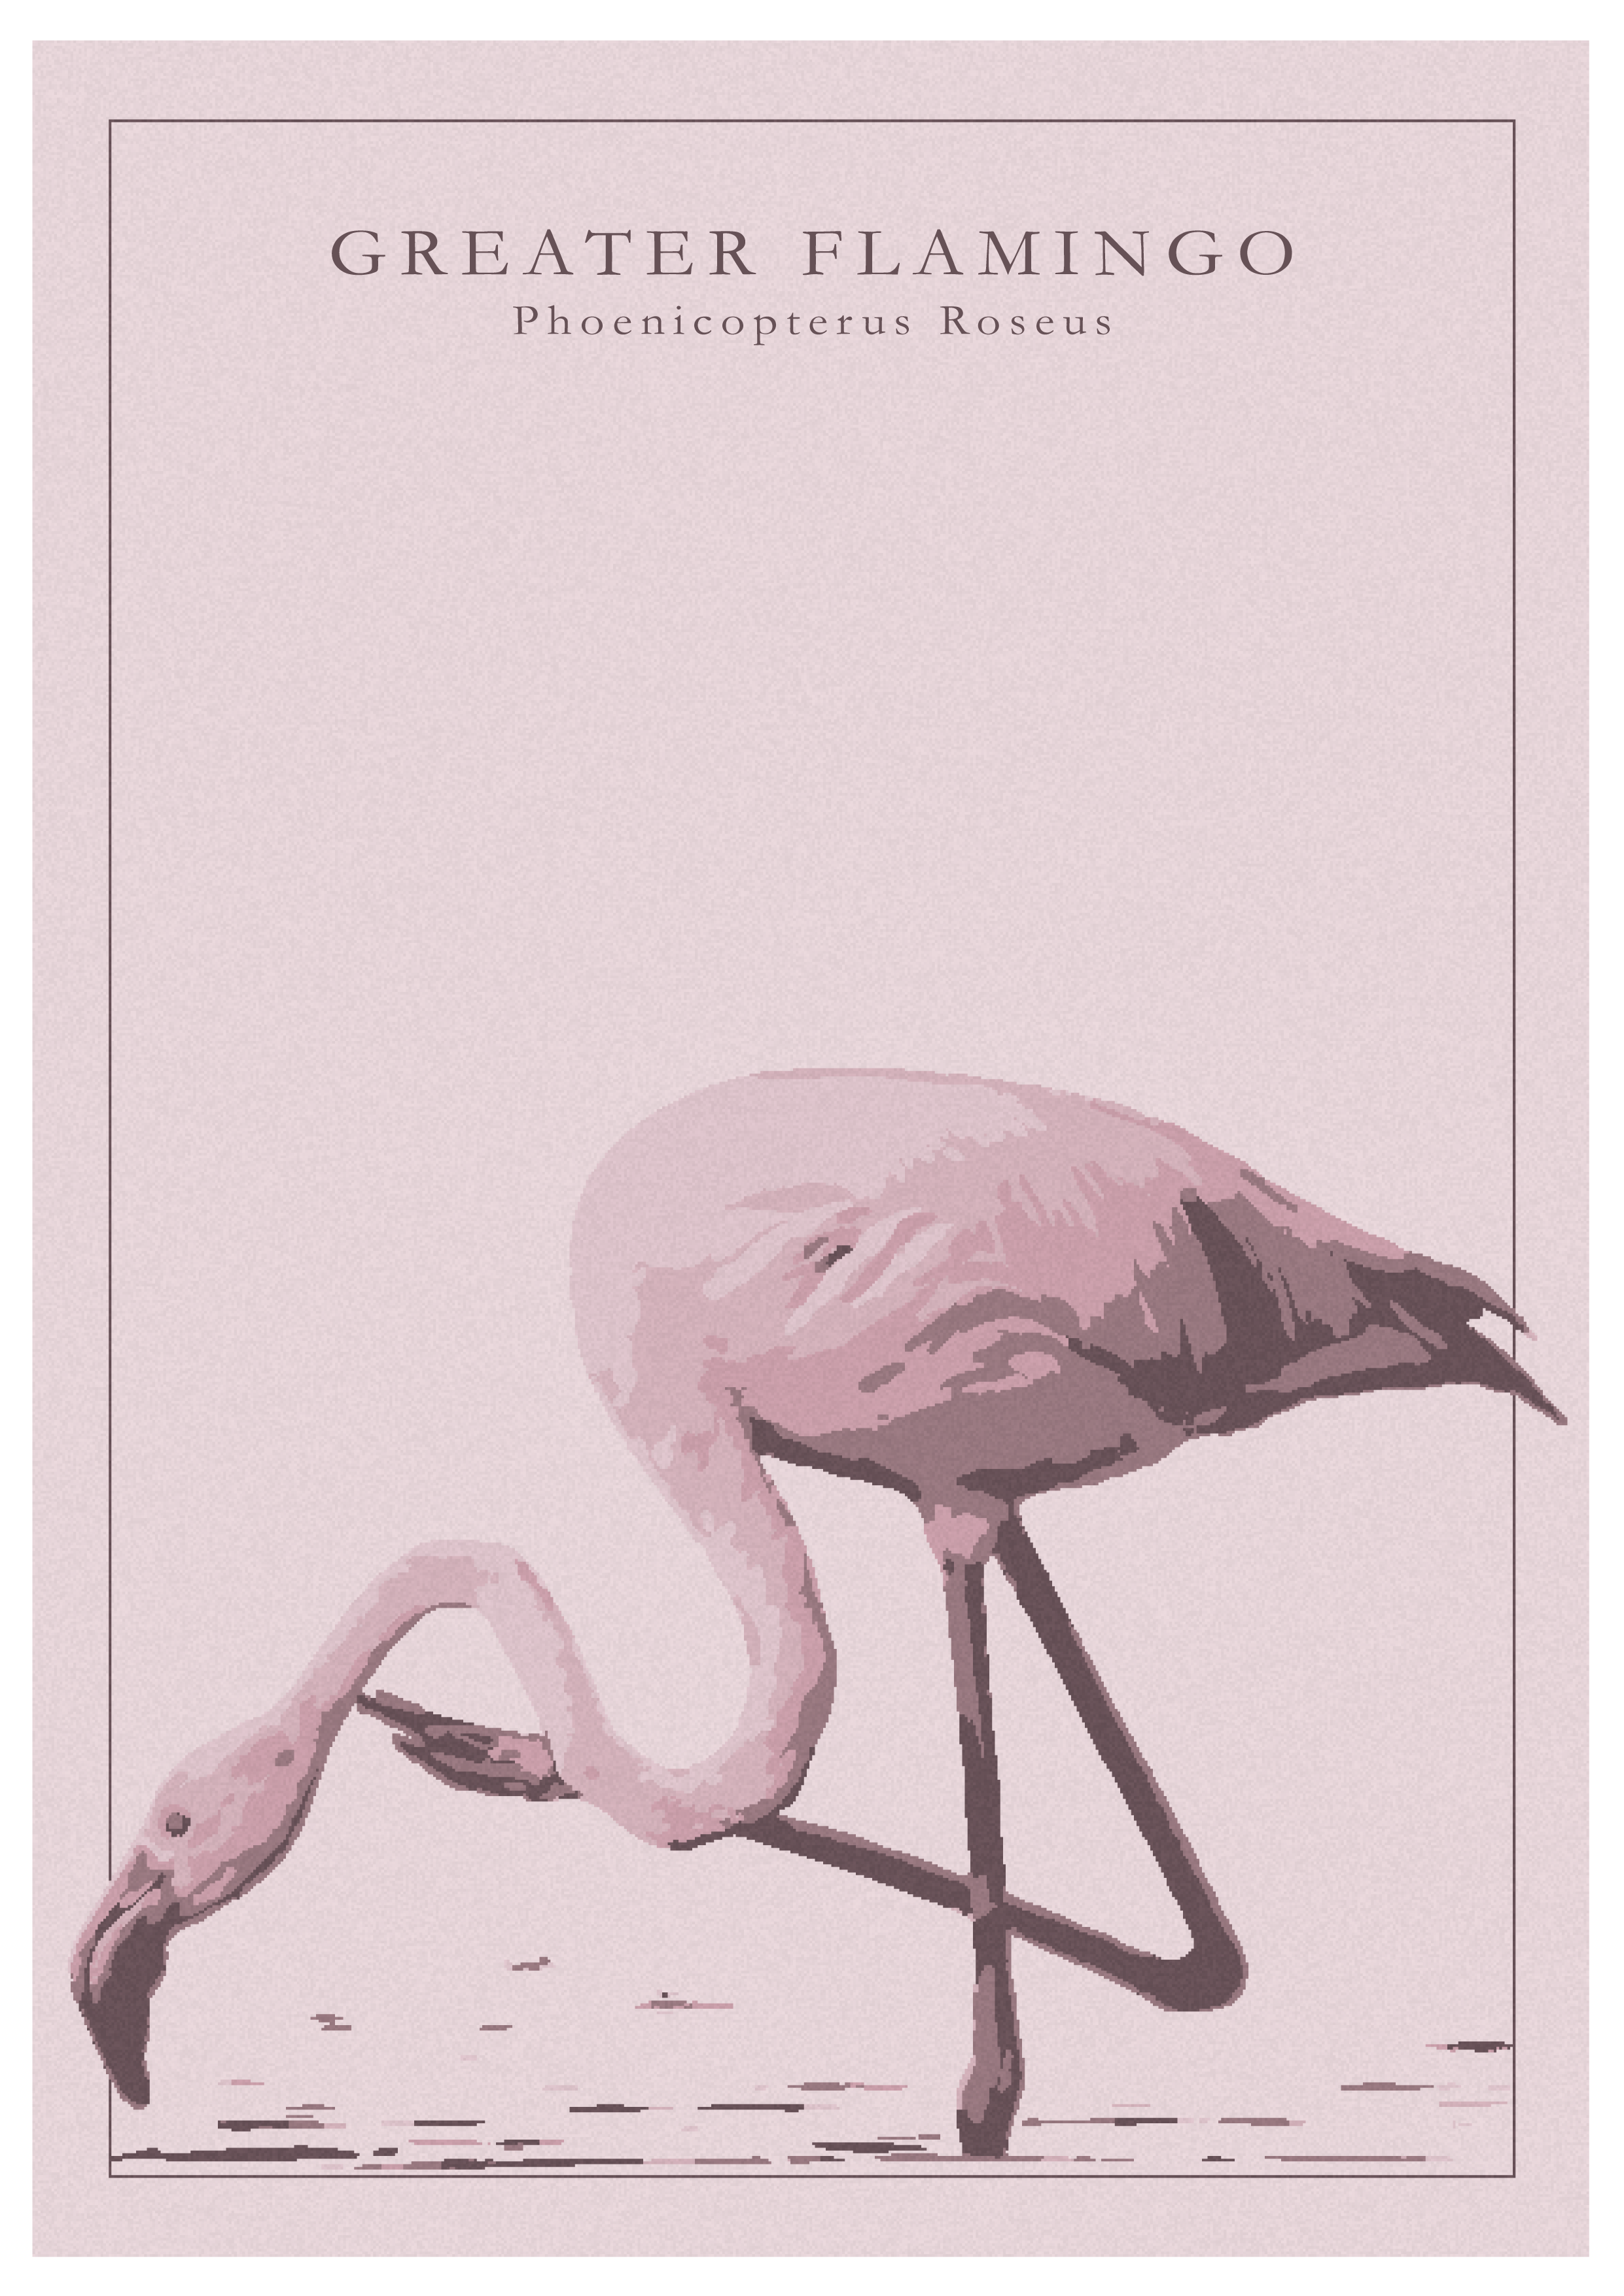 A graceful vector illustration of a Greater Flamingo, available for purchase as a print. The illustration showcases the flamingo's elegant, elongated neck and distinctive curved beak, set against a serene backdrop of soft pink hues. This artwork captures the beauty and poise of the Greater Flamingo, making it a captivating piece that can be enjoyed as a print.